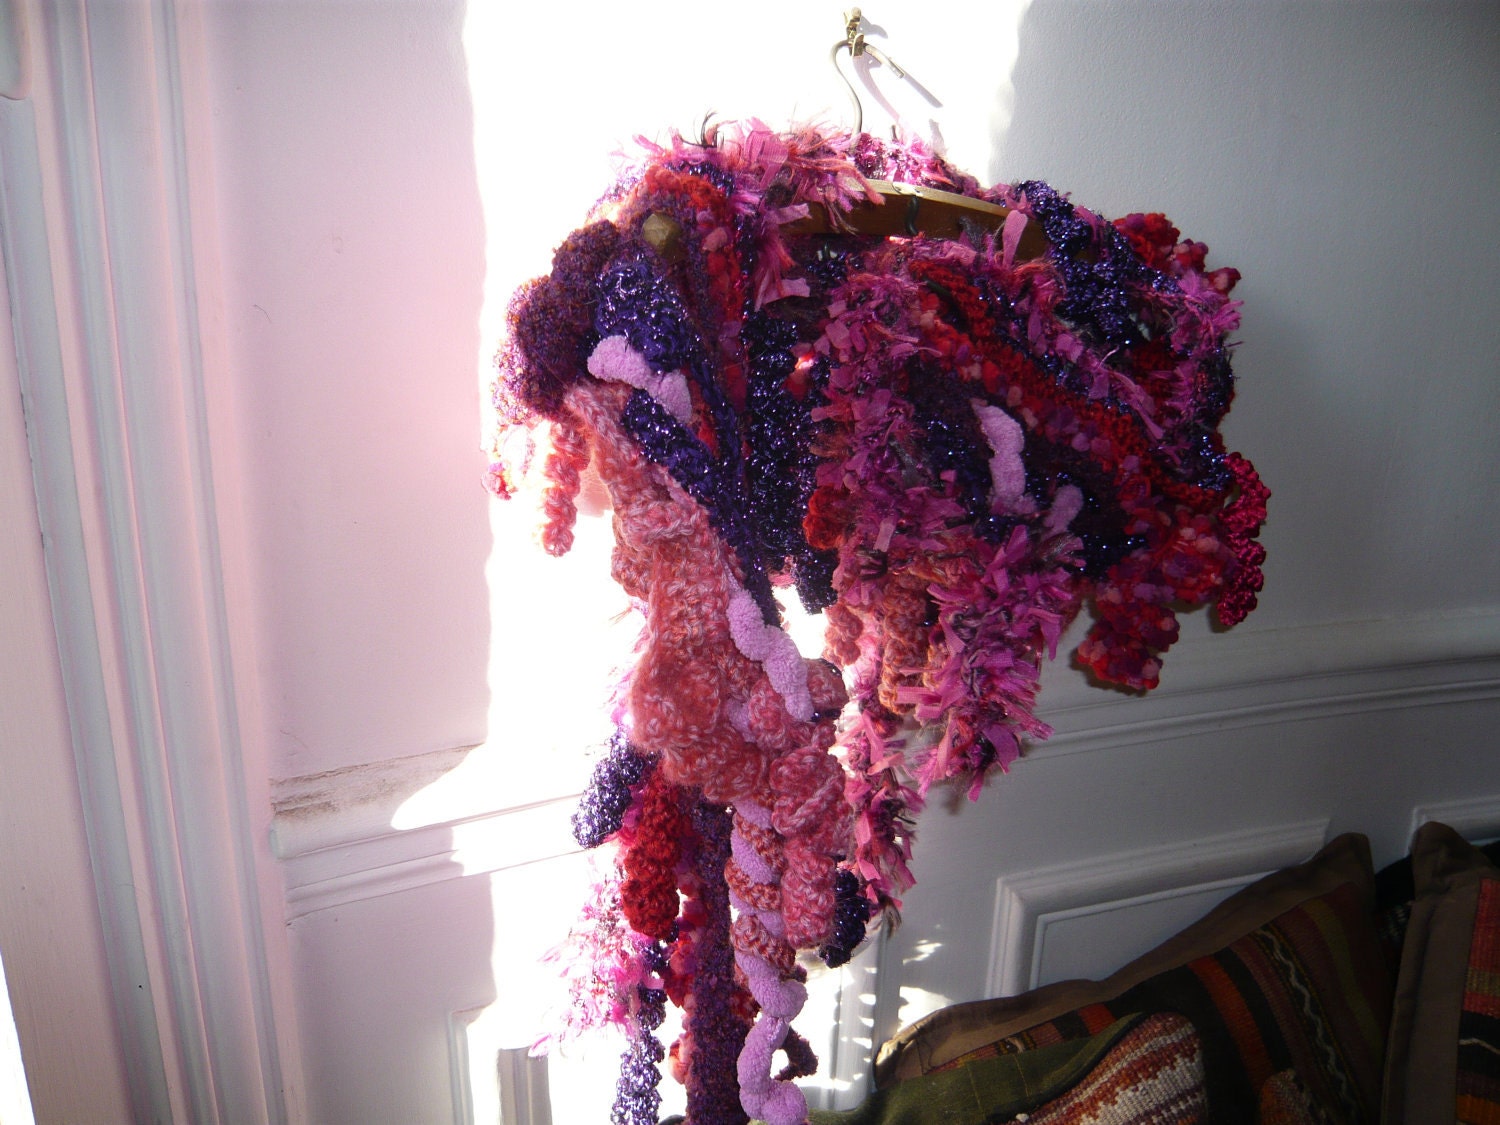 hand made crochet scarf called crazy scarf,pink, red,violets - lamamadesmatous